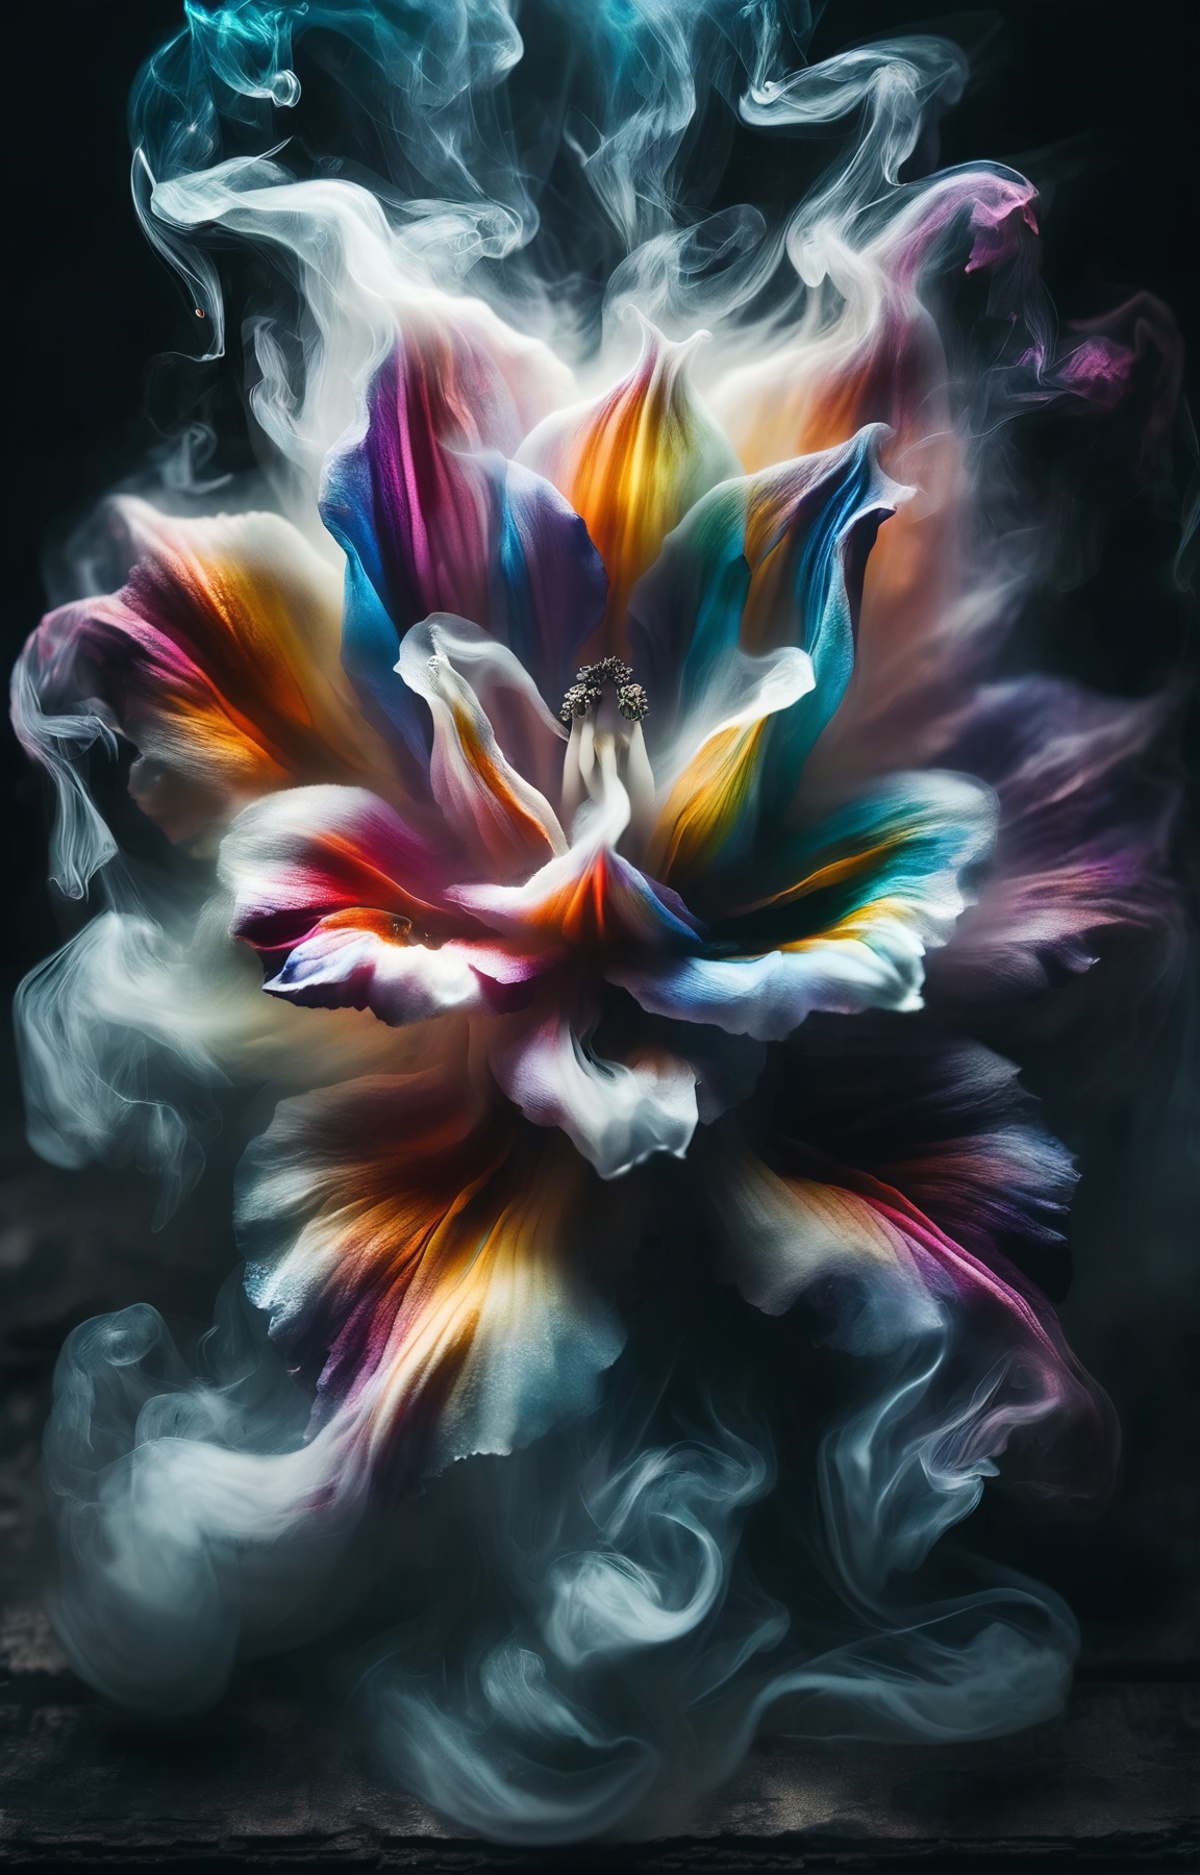 Colorful Flower Blurred with Smoke in a Black Background